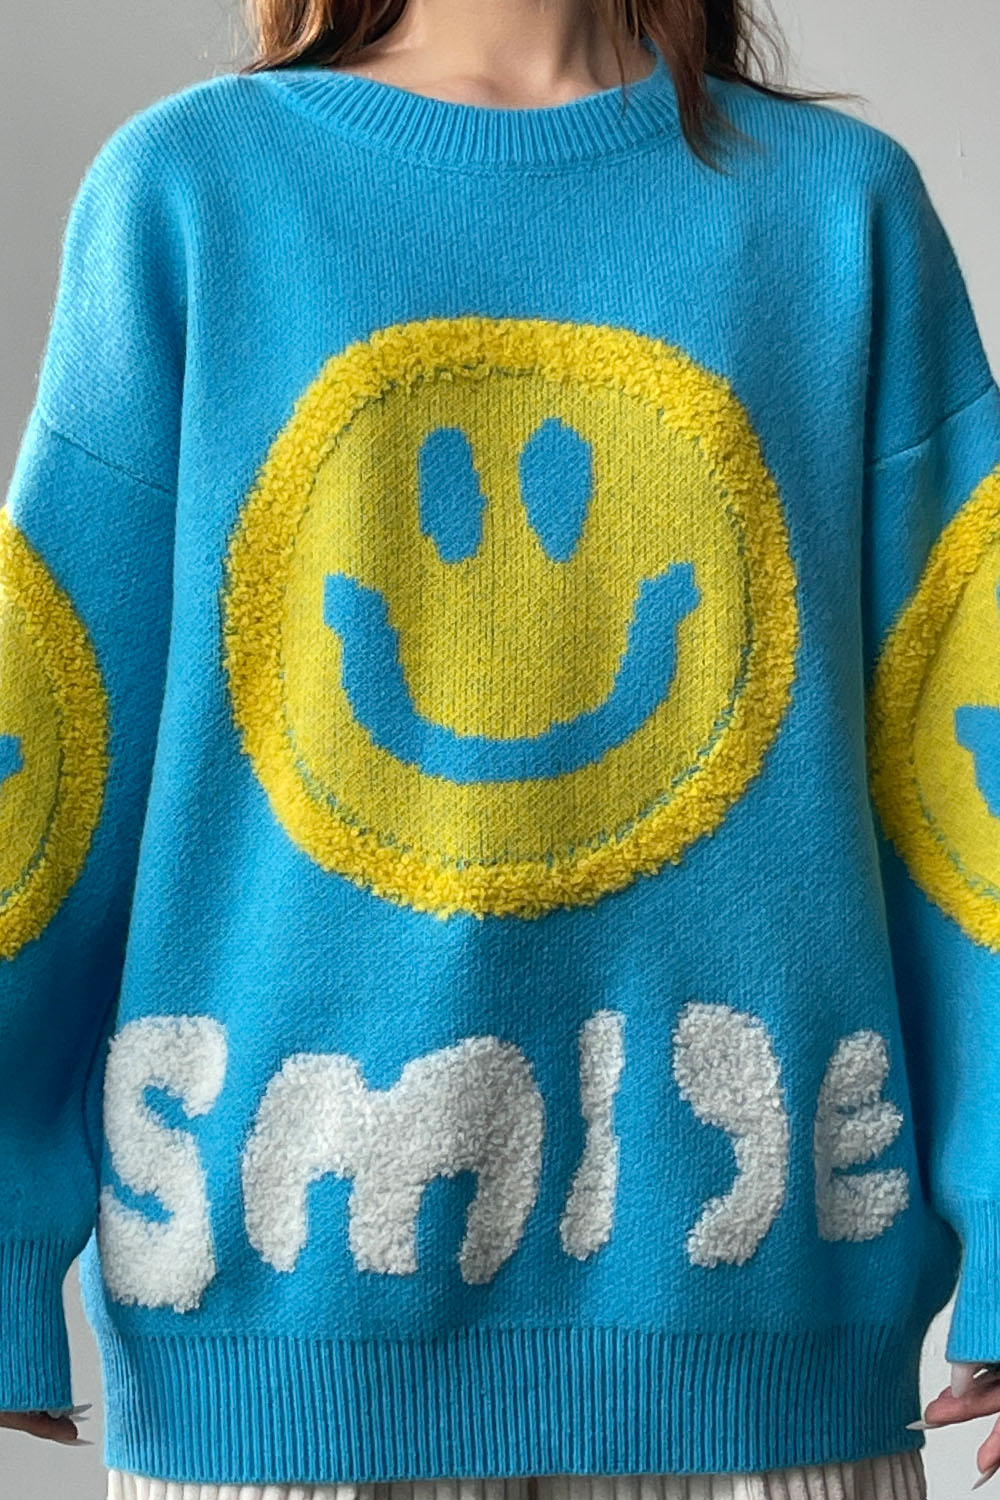 Smile Knit Sweater